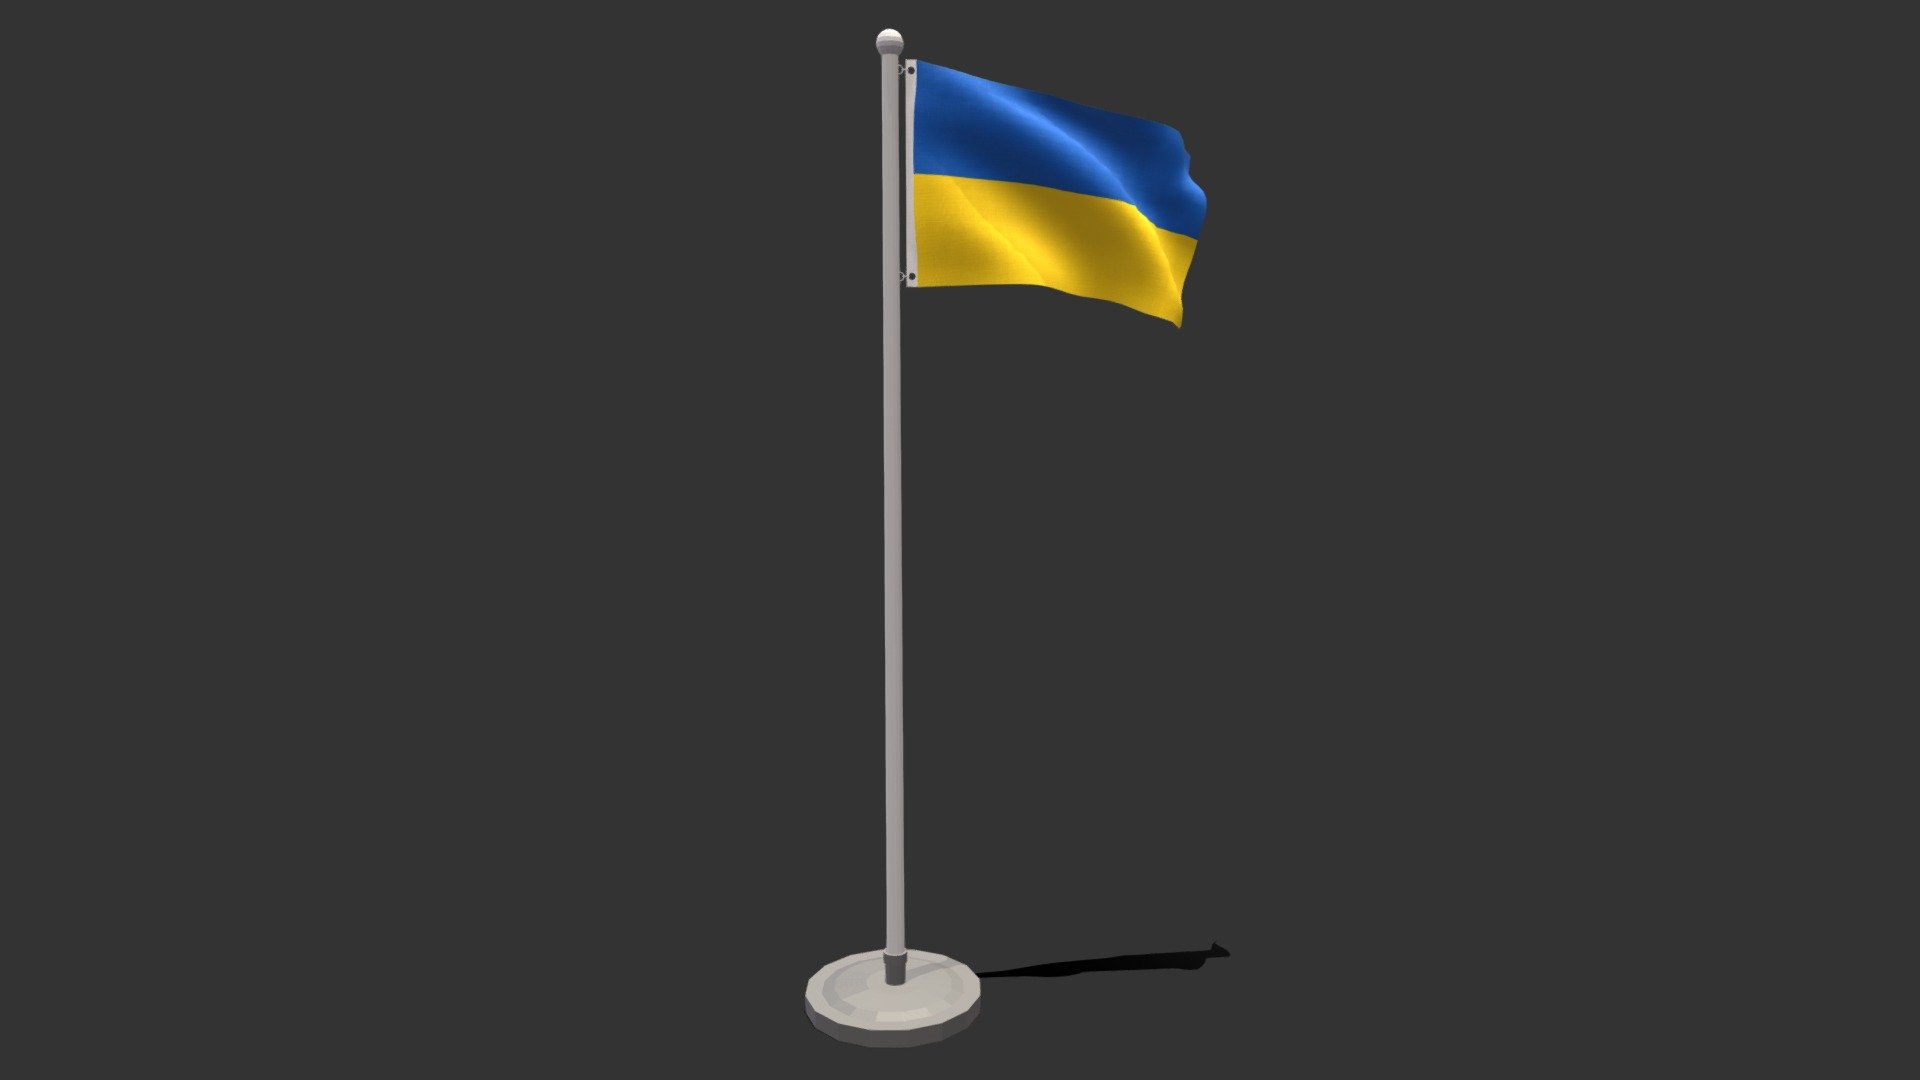 This is a low poly 3D model of an animated flag of Ukraine. The low poly flag was modeled and prepared for low-poly style renderings, background, general CG visualization presented as 2 meshes with quads only.

Verts : 1.536 Faces : 1.459.

1024x1024 textures included. Diffuse, roughness and normal maps available only for flag. The pole have simple materials with colors.

The animation is based on shapekeys, 248 frames and seamless, no rig included.

The original file was created in blender. You will receive a OBJ, FBX, blend, DAE, Stl, gLTF, abc.

PLEASE NOTE Animation icluded only in blend, abc and glTF files.

Warning: Depending on which software package you are using, the exchange formats (.obj , .dae, .fbx) may not match the preview images exactly. Due to the nature of these formats, there may be some textures that have to be loaded by hand and possibly triangulated geometry 3d model